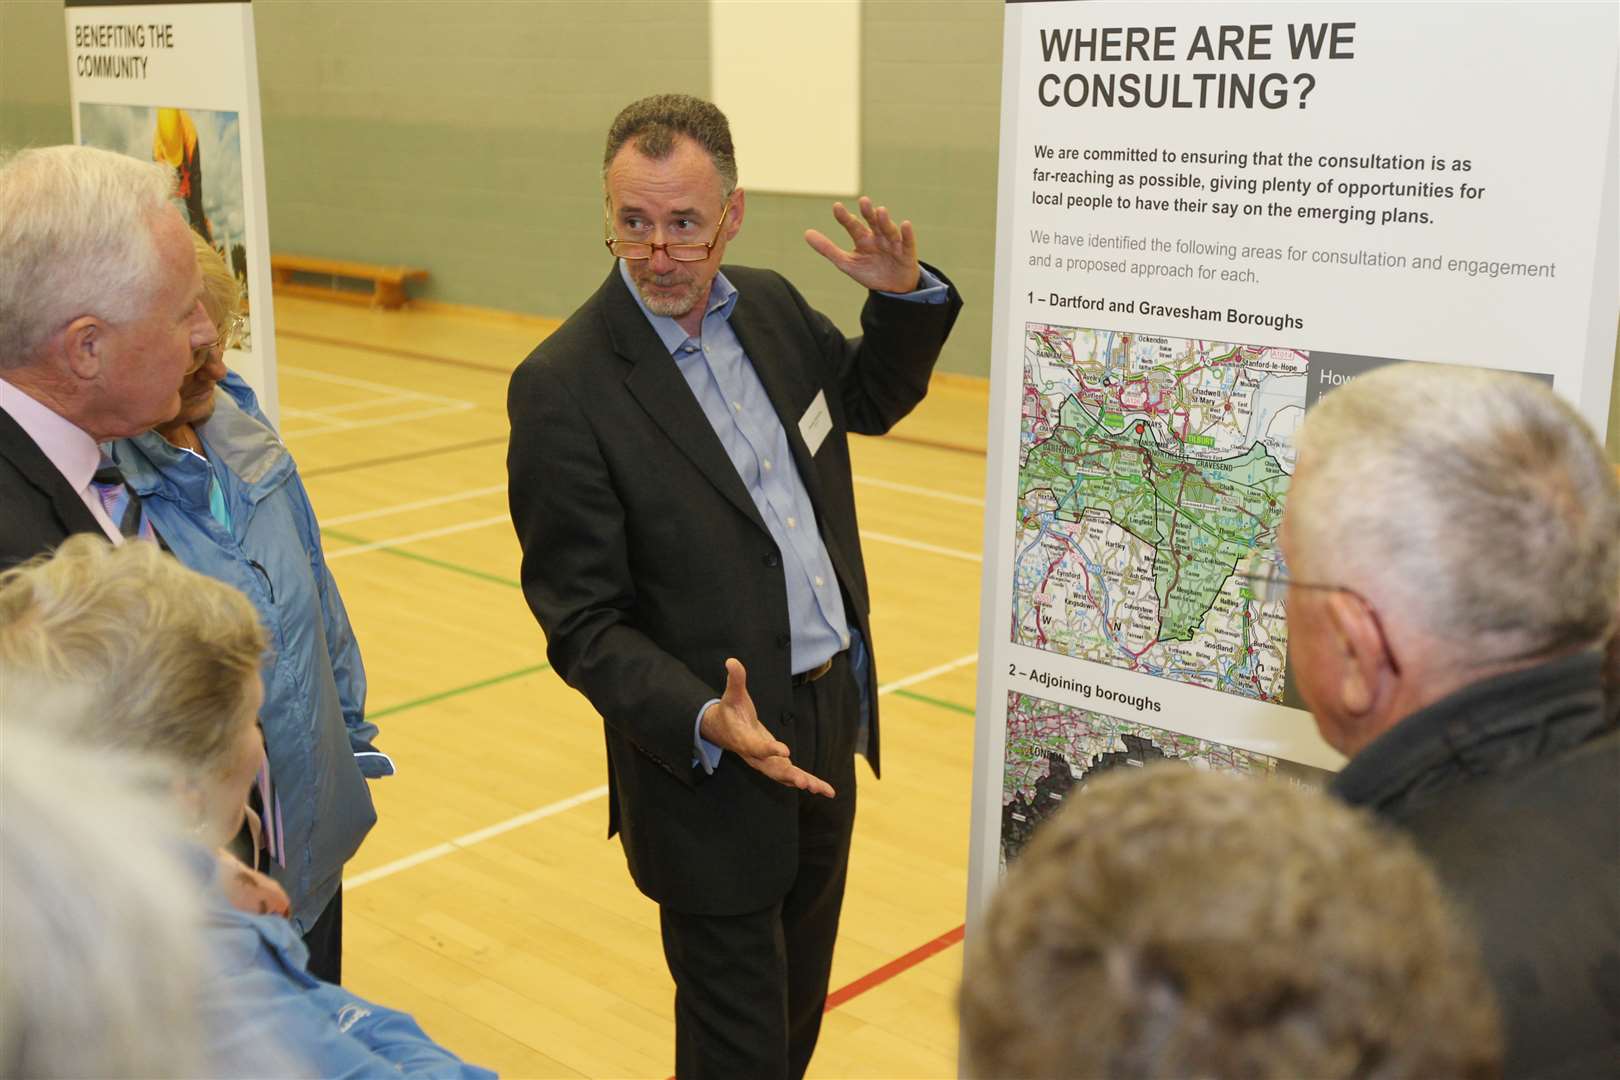 Former London Resort Company Holdings director Fenlon Dunphy talks to visitors at the first consultation about the Paramount resort